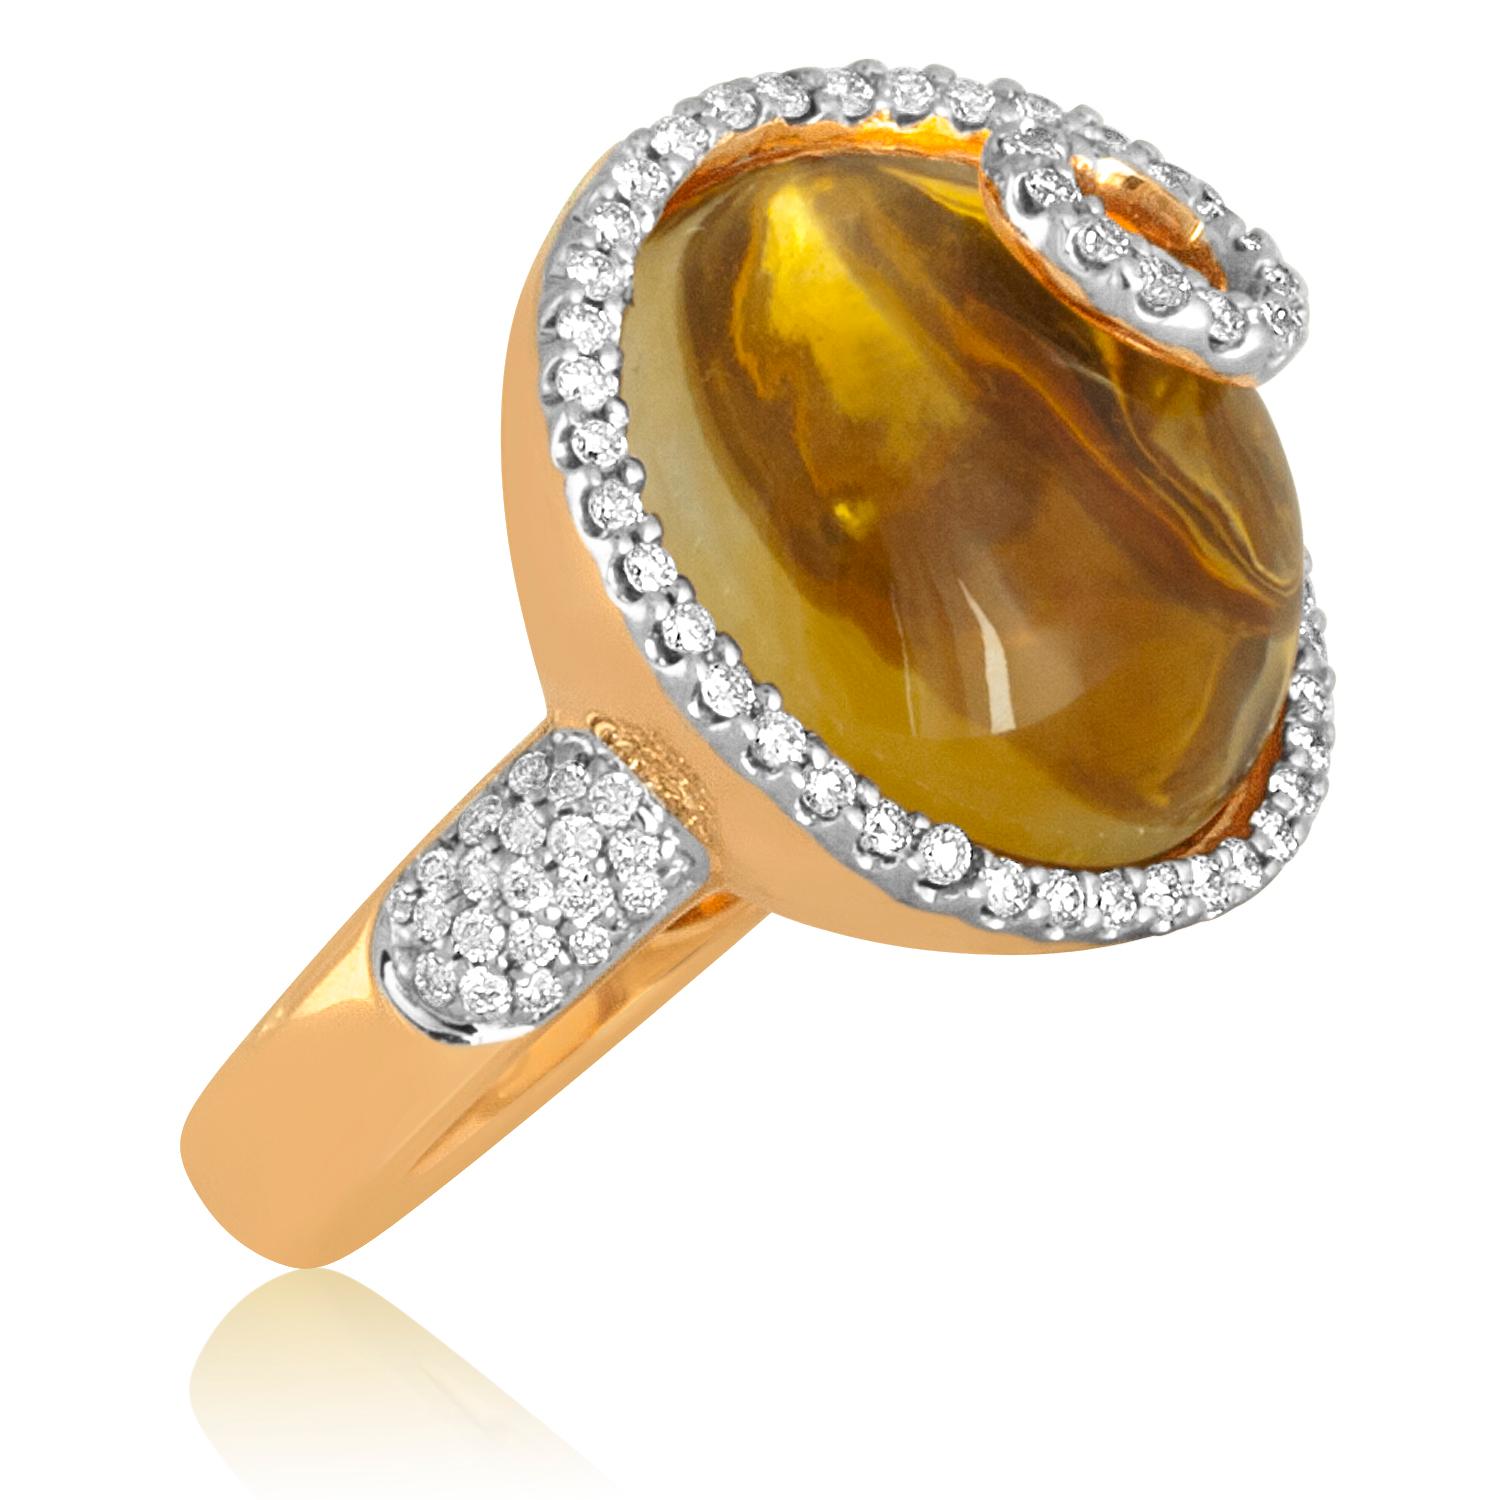 Beautiful Statement Ring
The ring is 14K Yellow Gold.
The Center Stone is a Cabochon Citrine 14.65 Carats
There are 0.70 Carats in Diamonds H/I SI
The top of the ring measures 0.75